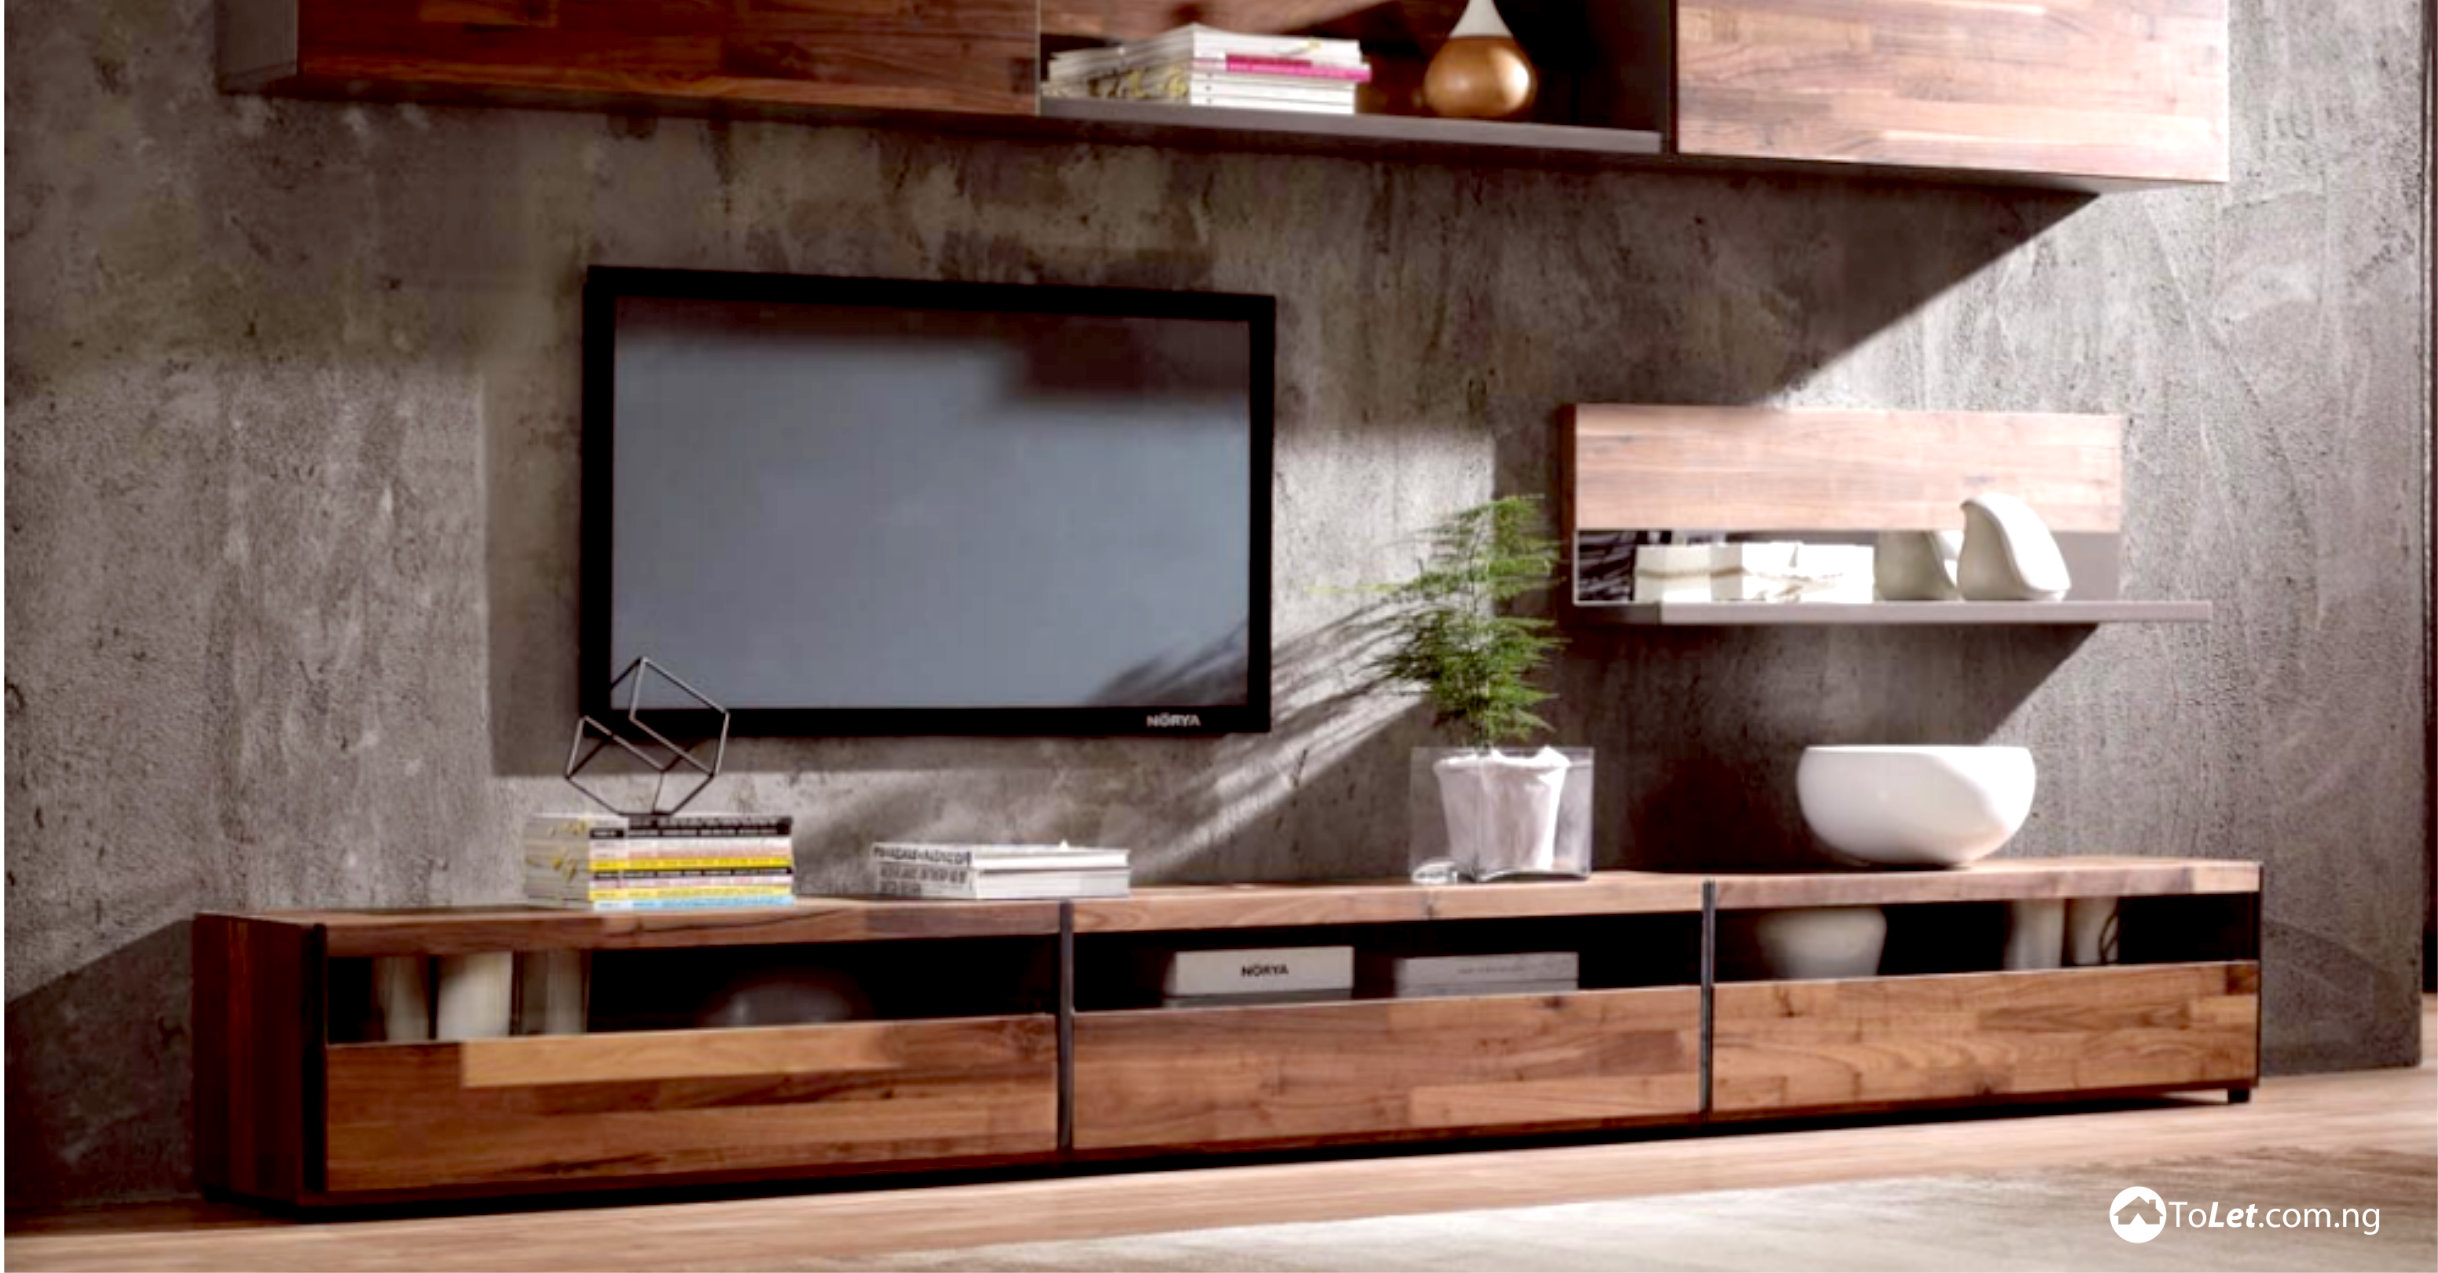 5 Conventional Types Of Tv Stands